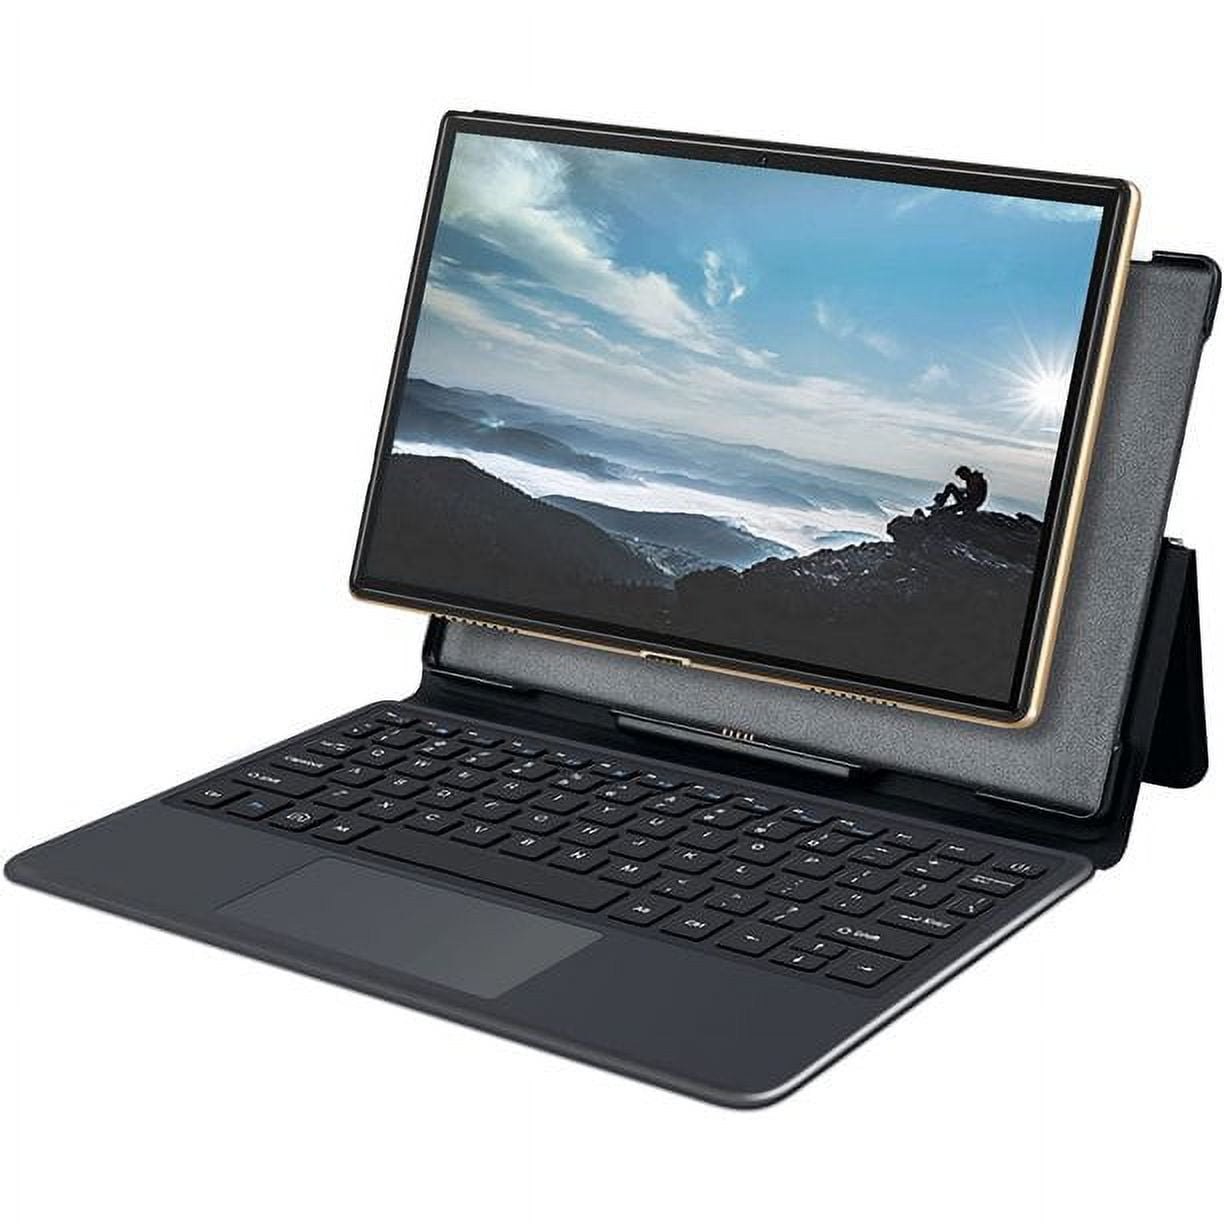 YESTEL Tablet 11 inch Android 11 Tablets - 2176x1600 2K FHD IPS丨4GB RAM  128GB ROM丨‎9500mAh丨8MP+13MP Dual Camera丨1.8GHz  Quad-Core丨WiFi,GMS丨Protective Case (Lavender Purple) price in UAE,   UAE